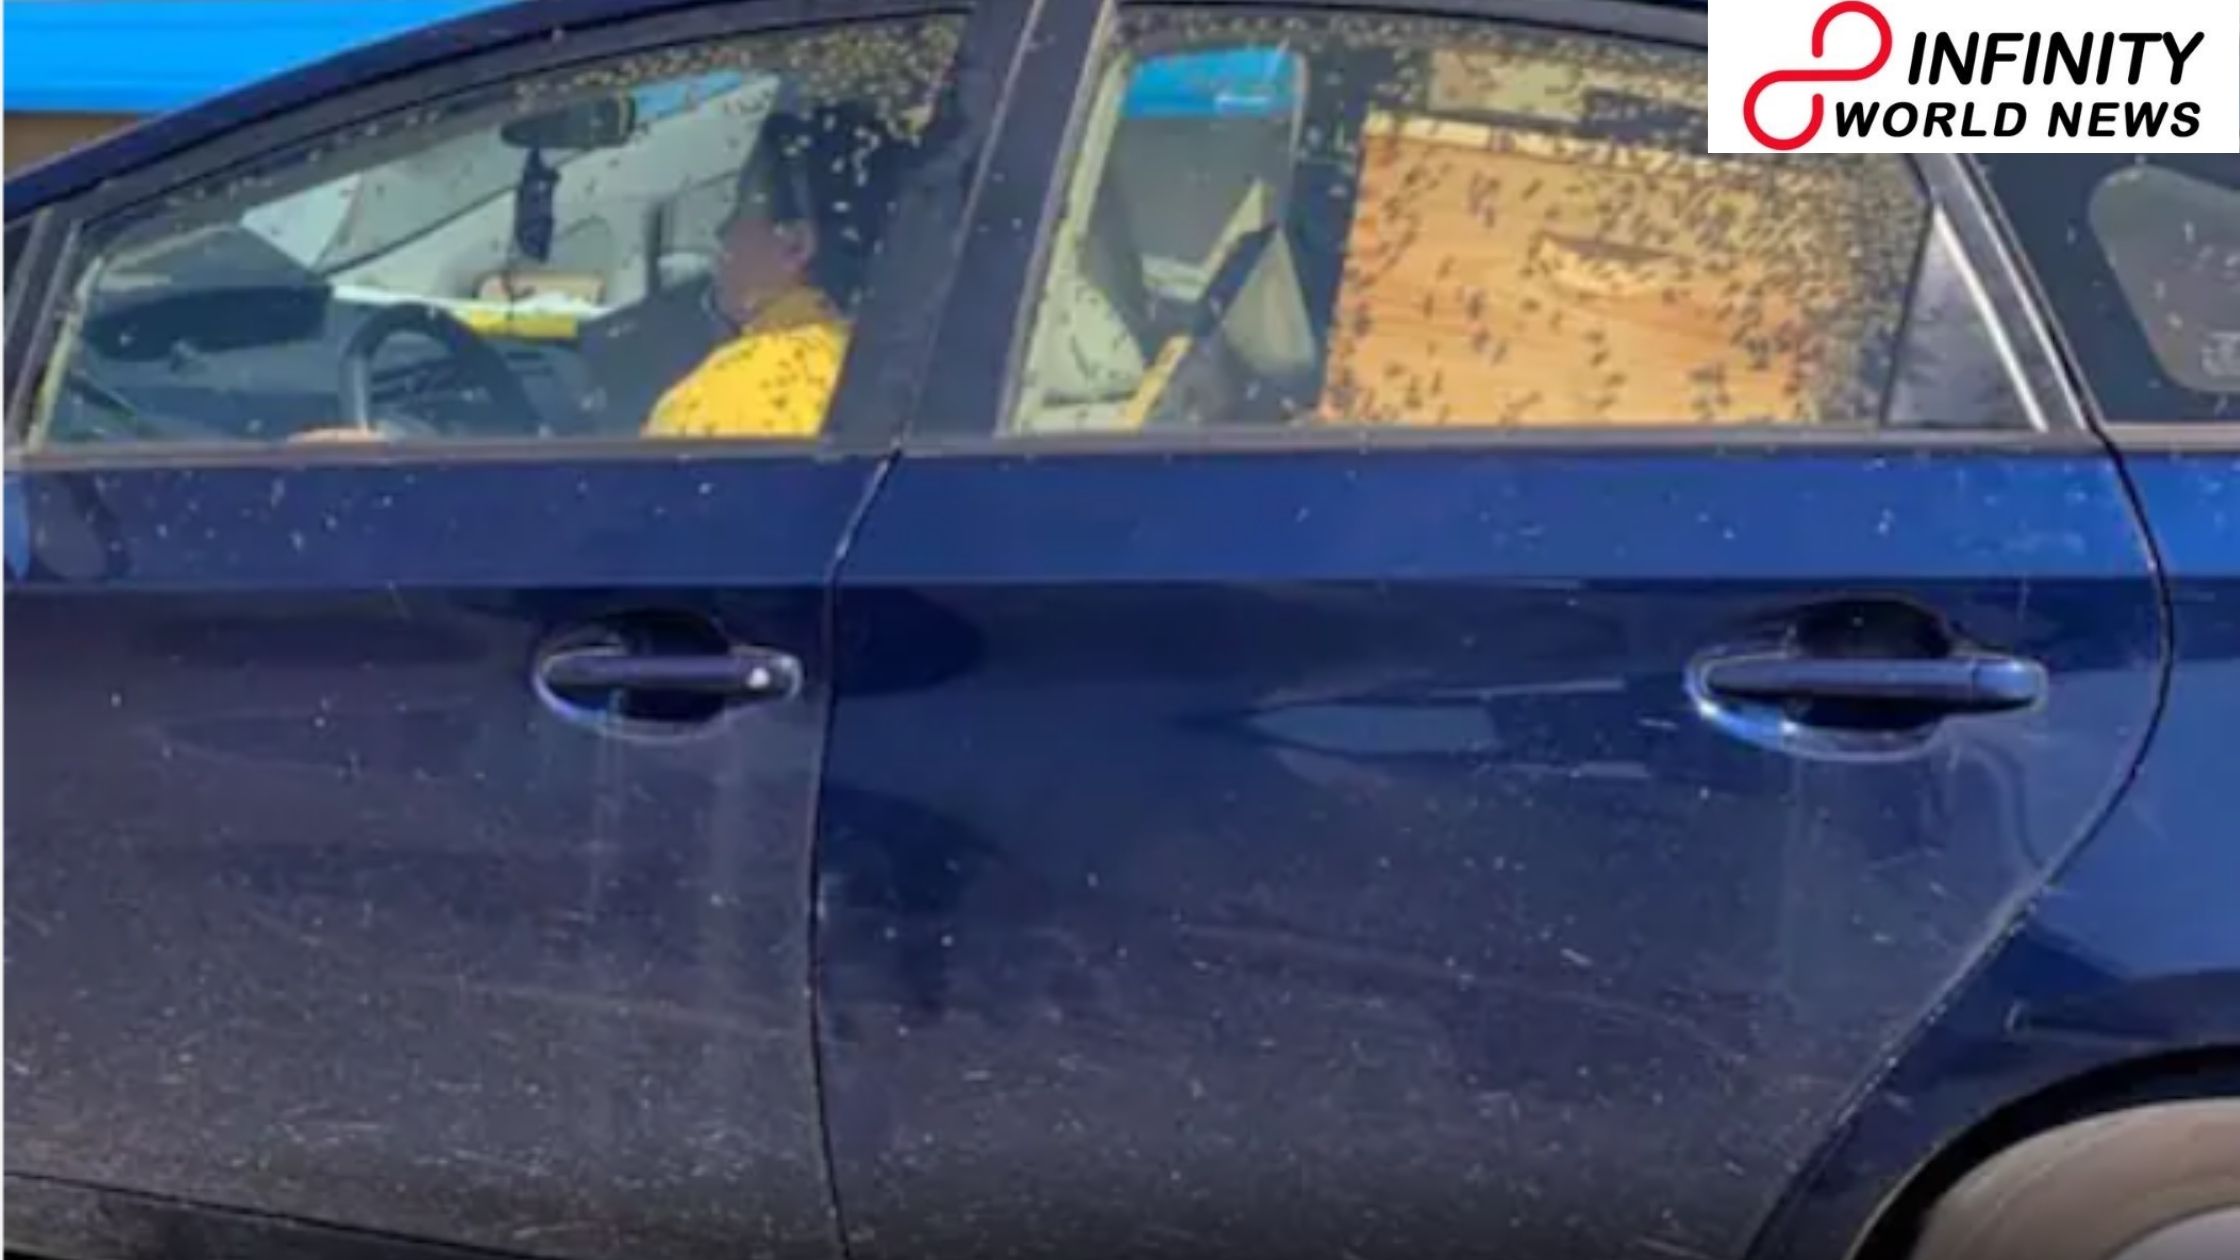 Strange! Lady in US Drives Car with Hundreds of Bees Swarming inside in Viral Image